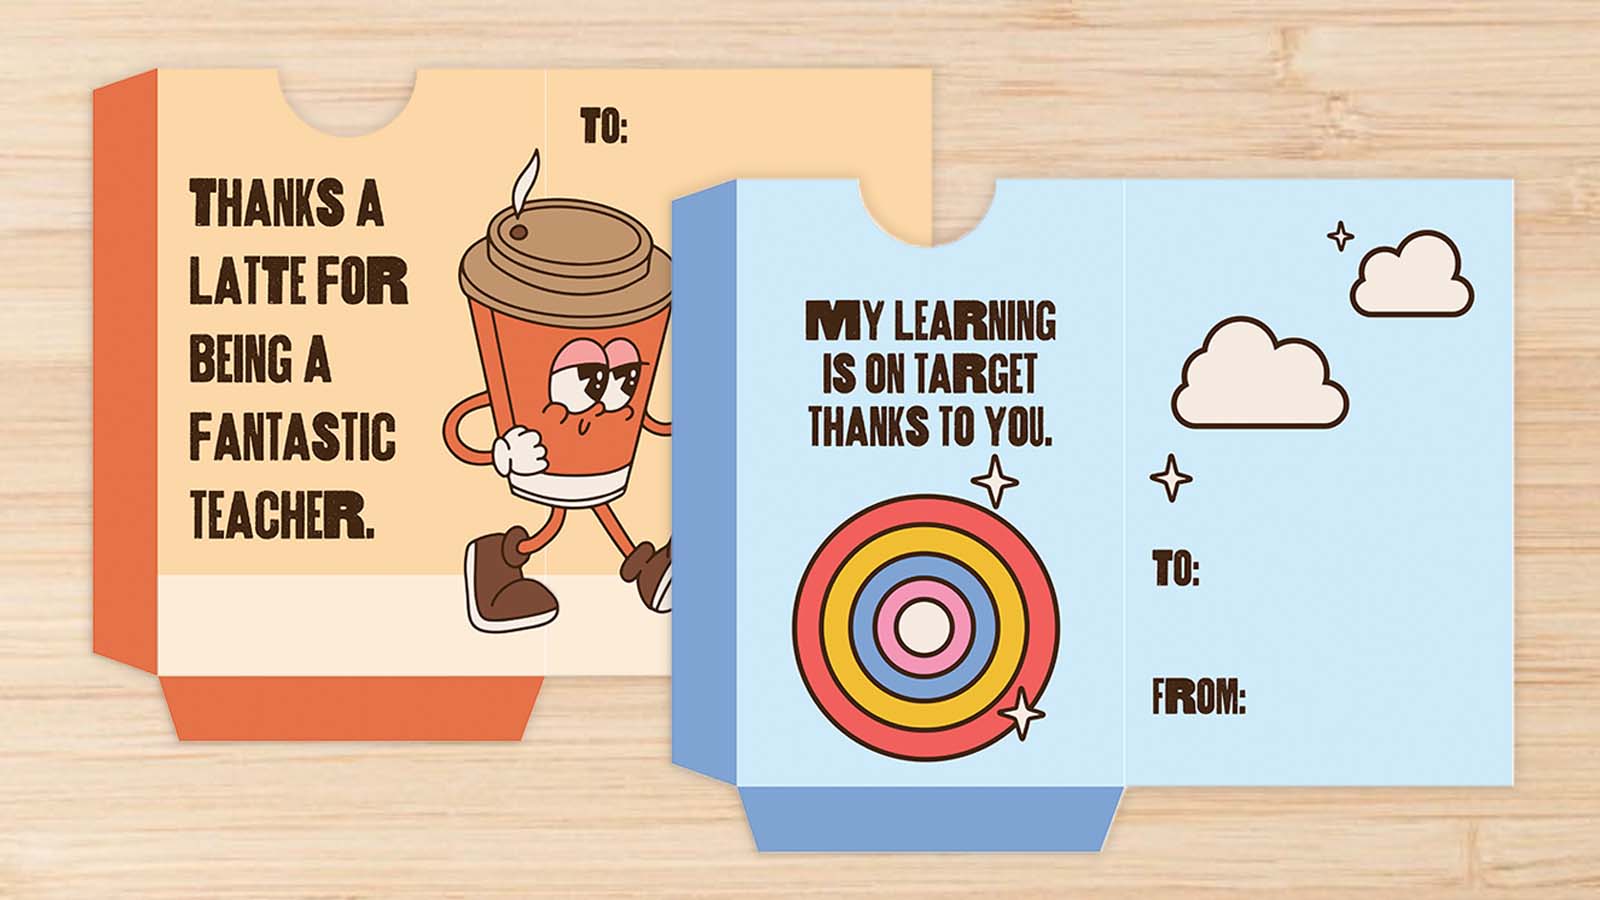 Examples of printable teacher thank you gift card holders including one for Target and one for Starbucks.